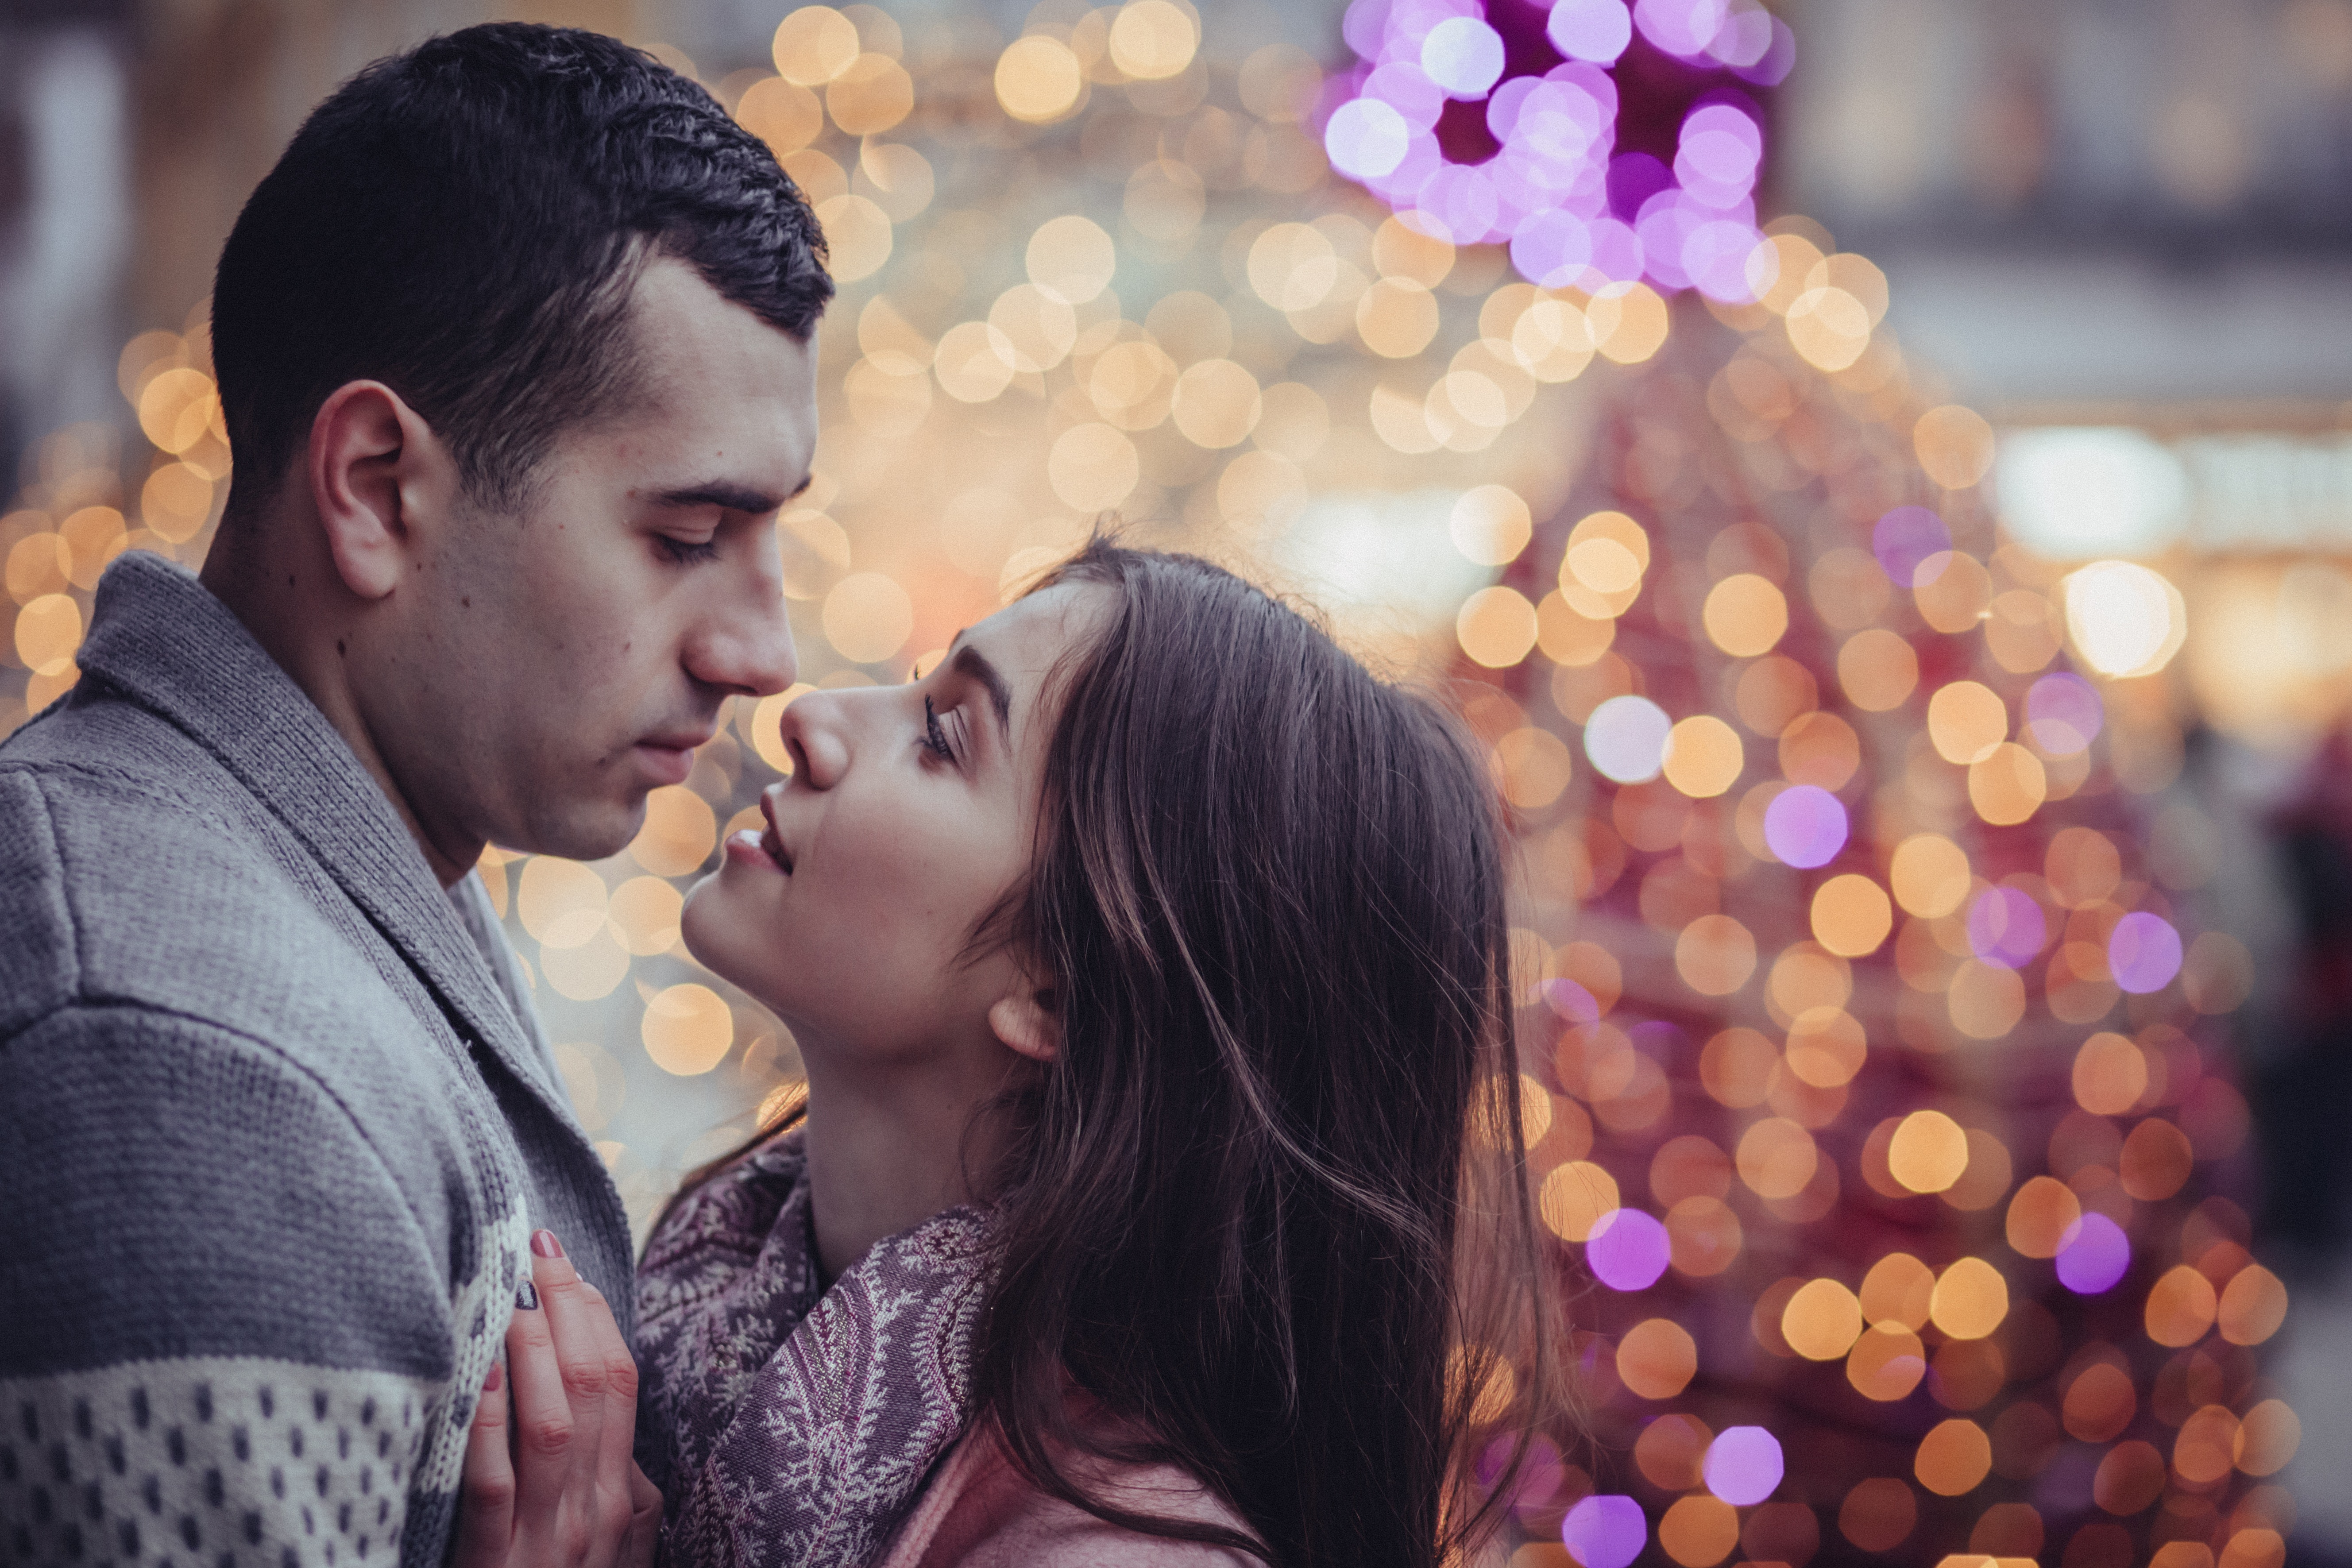 How to Make the Most of Your First Christmas as a Couple